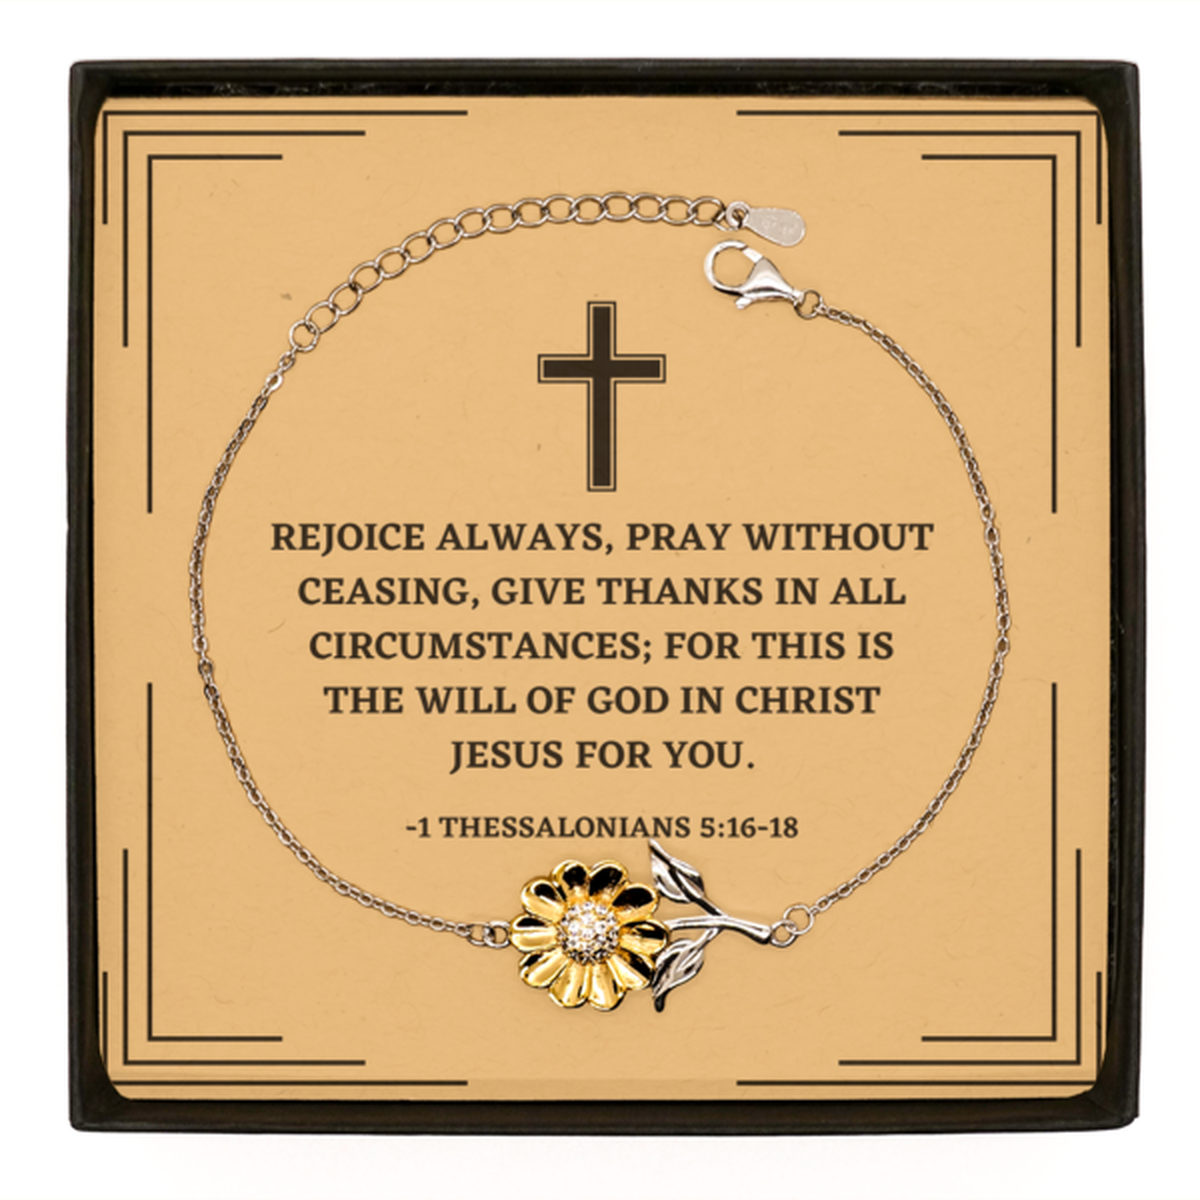 Baptism Gifts For Teenage Boys Girls, Christian Bible Verse Sterling Silver Sunflower Bracelet, Rejoice always, pray without ceasing, Confirmation Gifts, Bible Verse Card for Son, Godson, Grandson